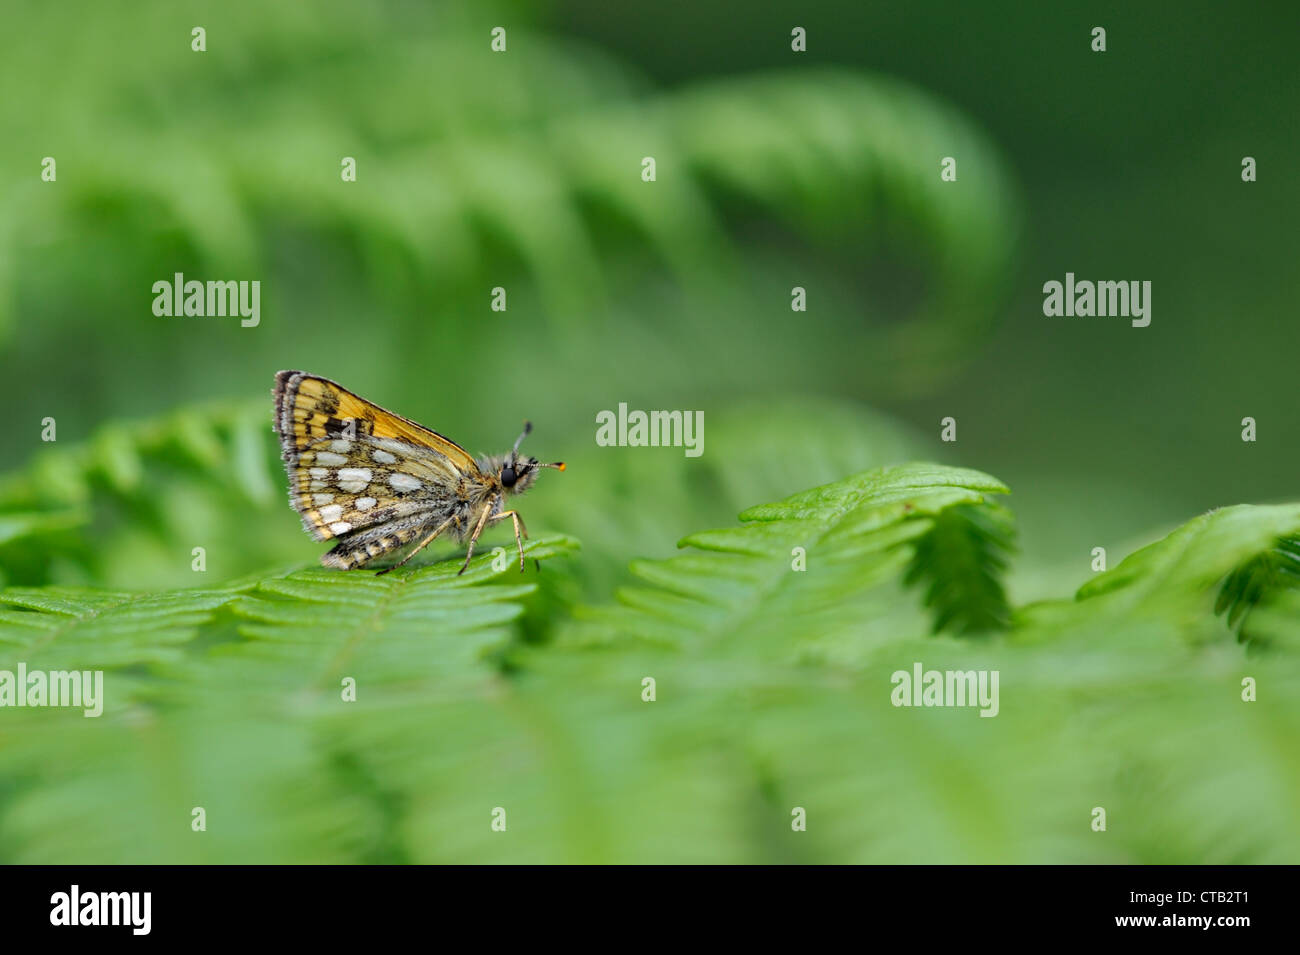 Chequered skipper butterfly (Carterocephalus palaemon) Stock Photo